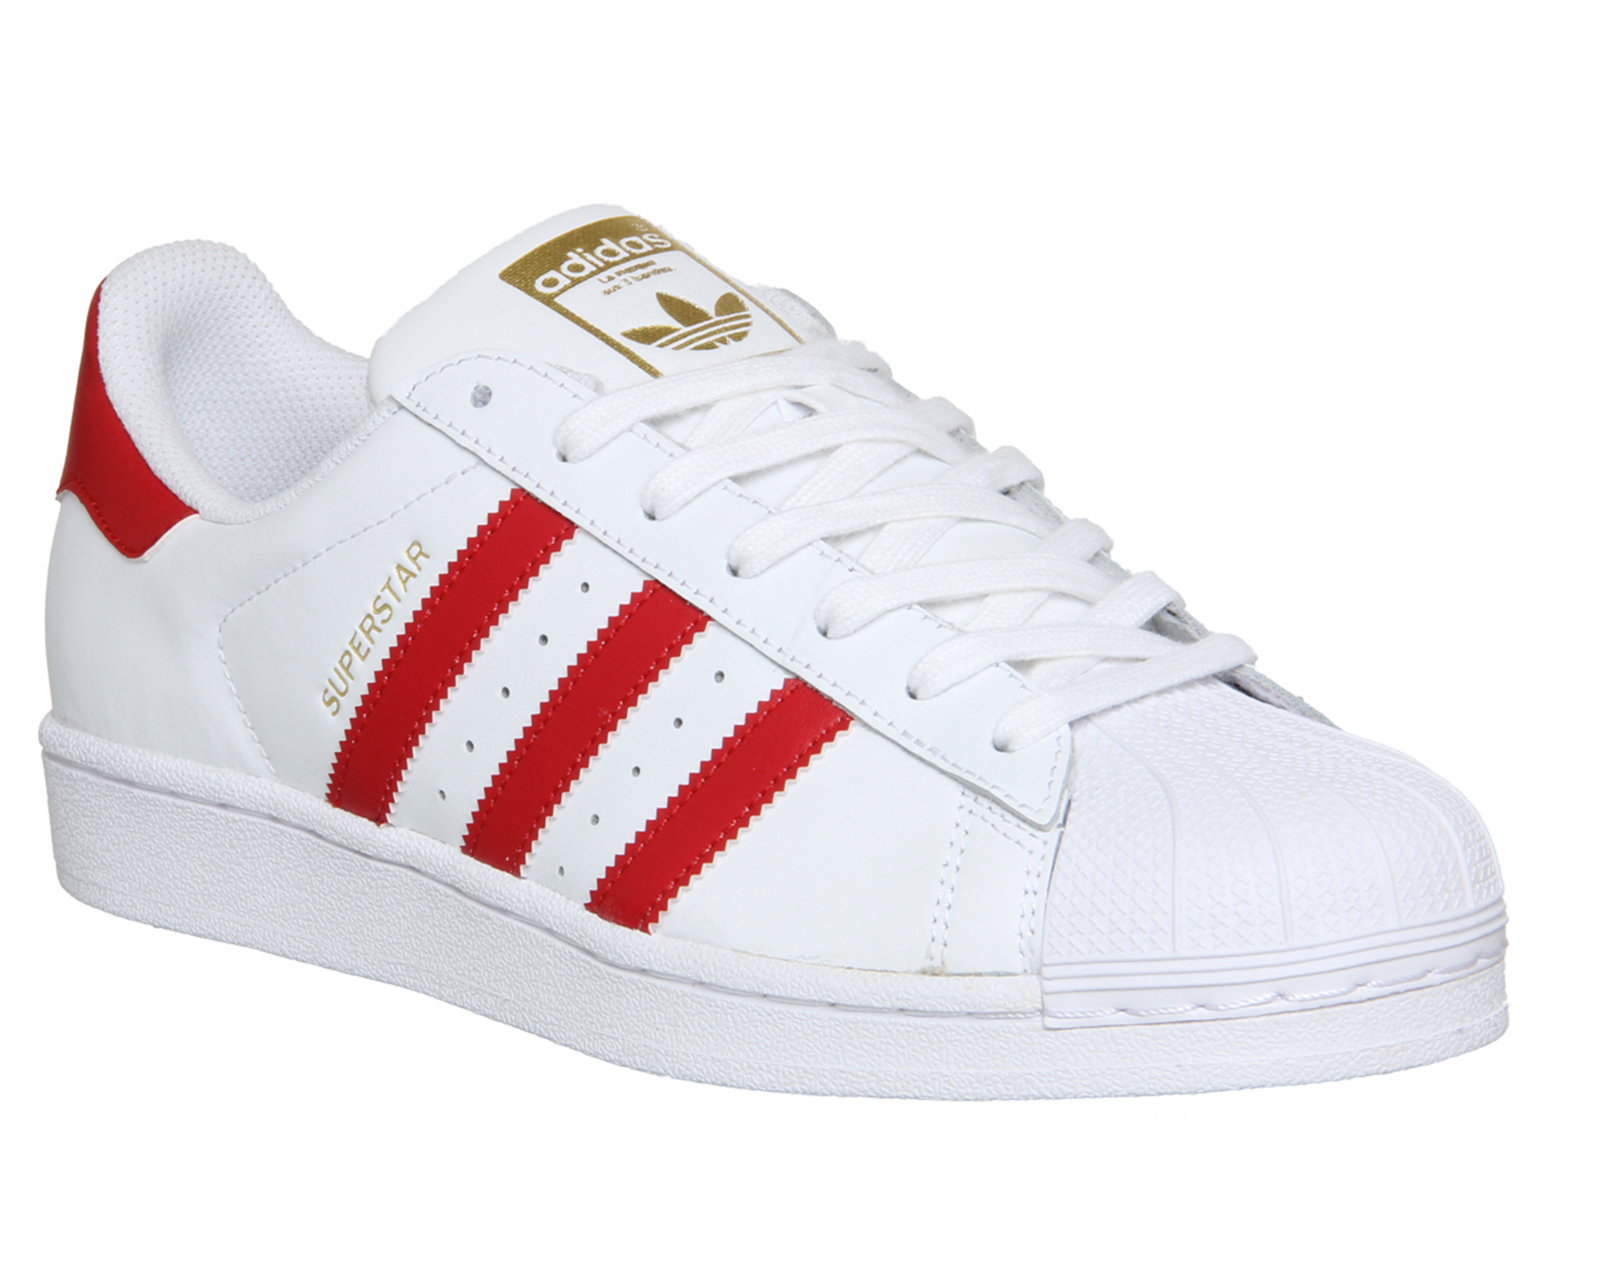 red white shell toe adidas